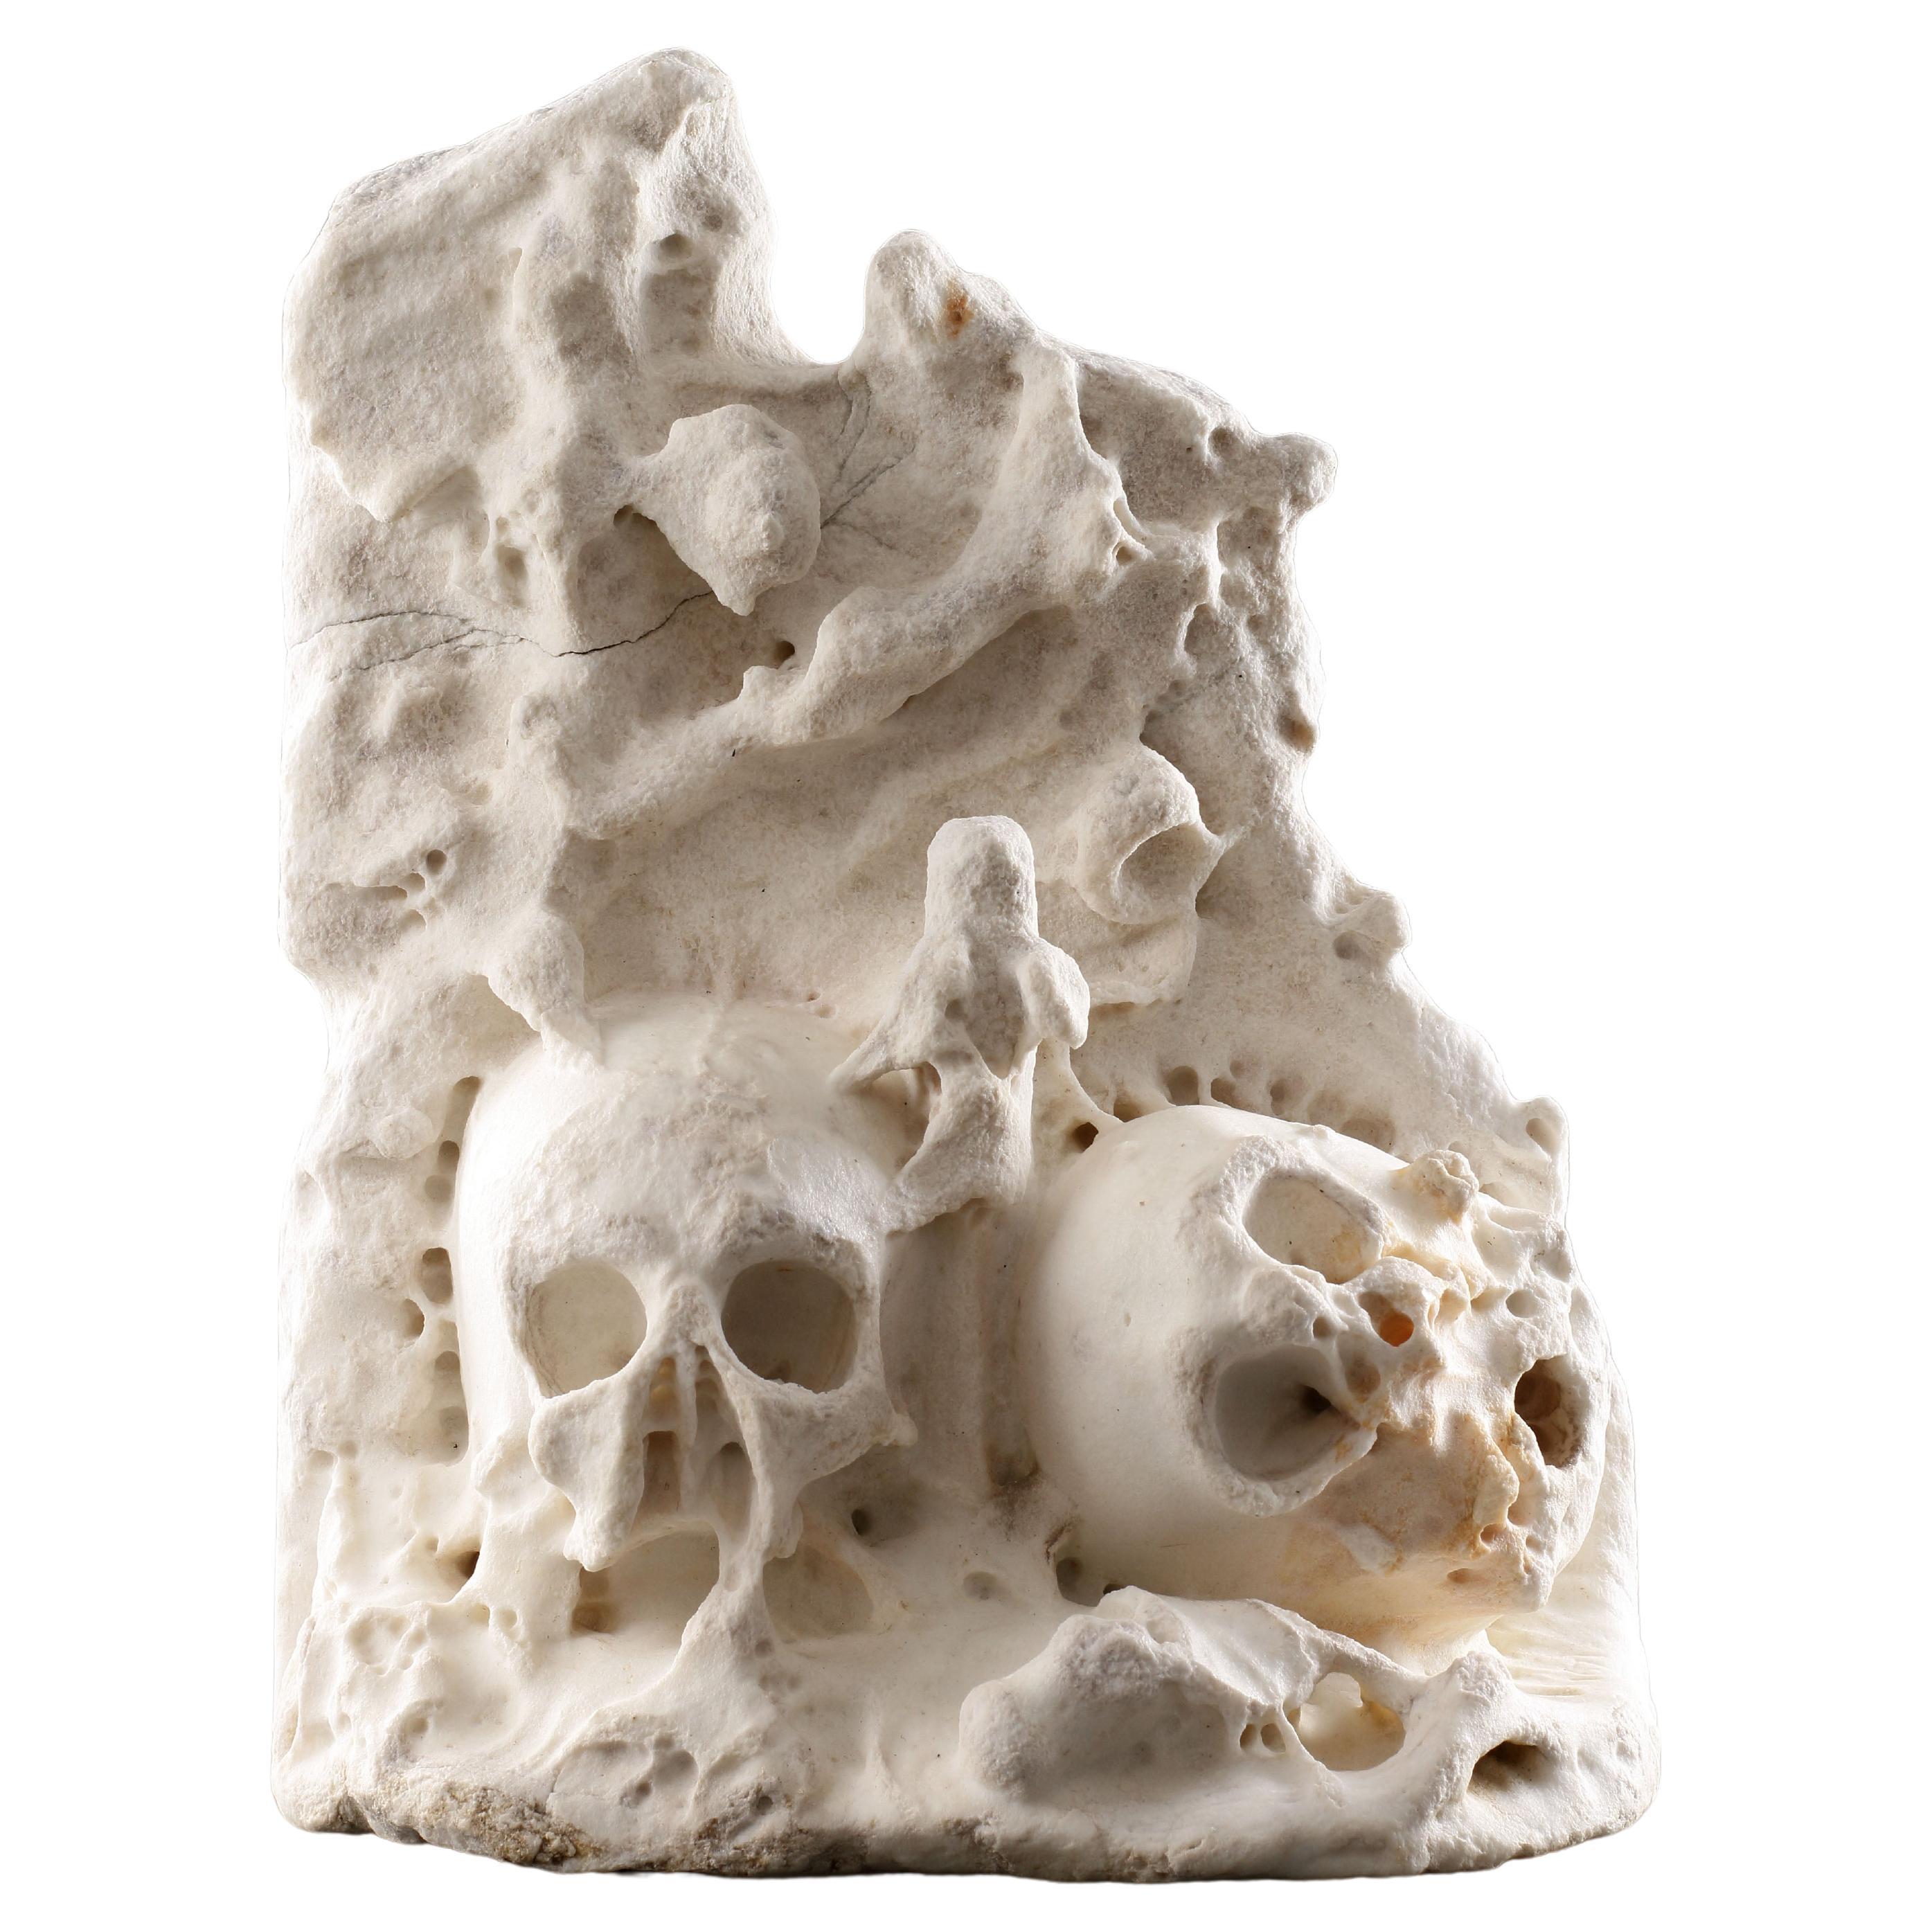 An Unusual and Rare English ‘Memento Mori’ Carved Shrine with Two Human Skulls